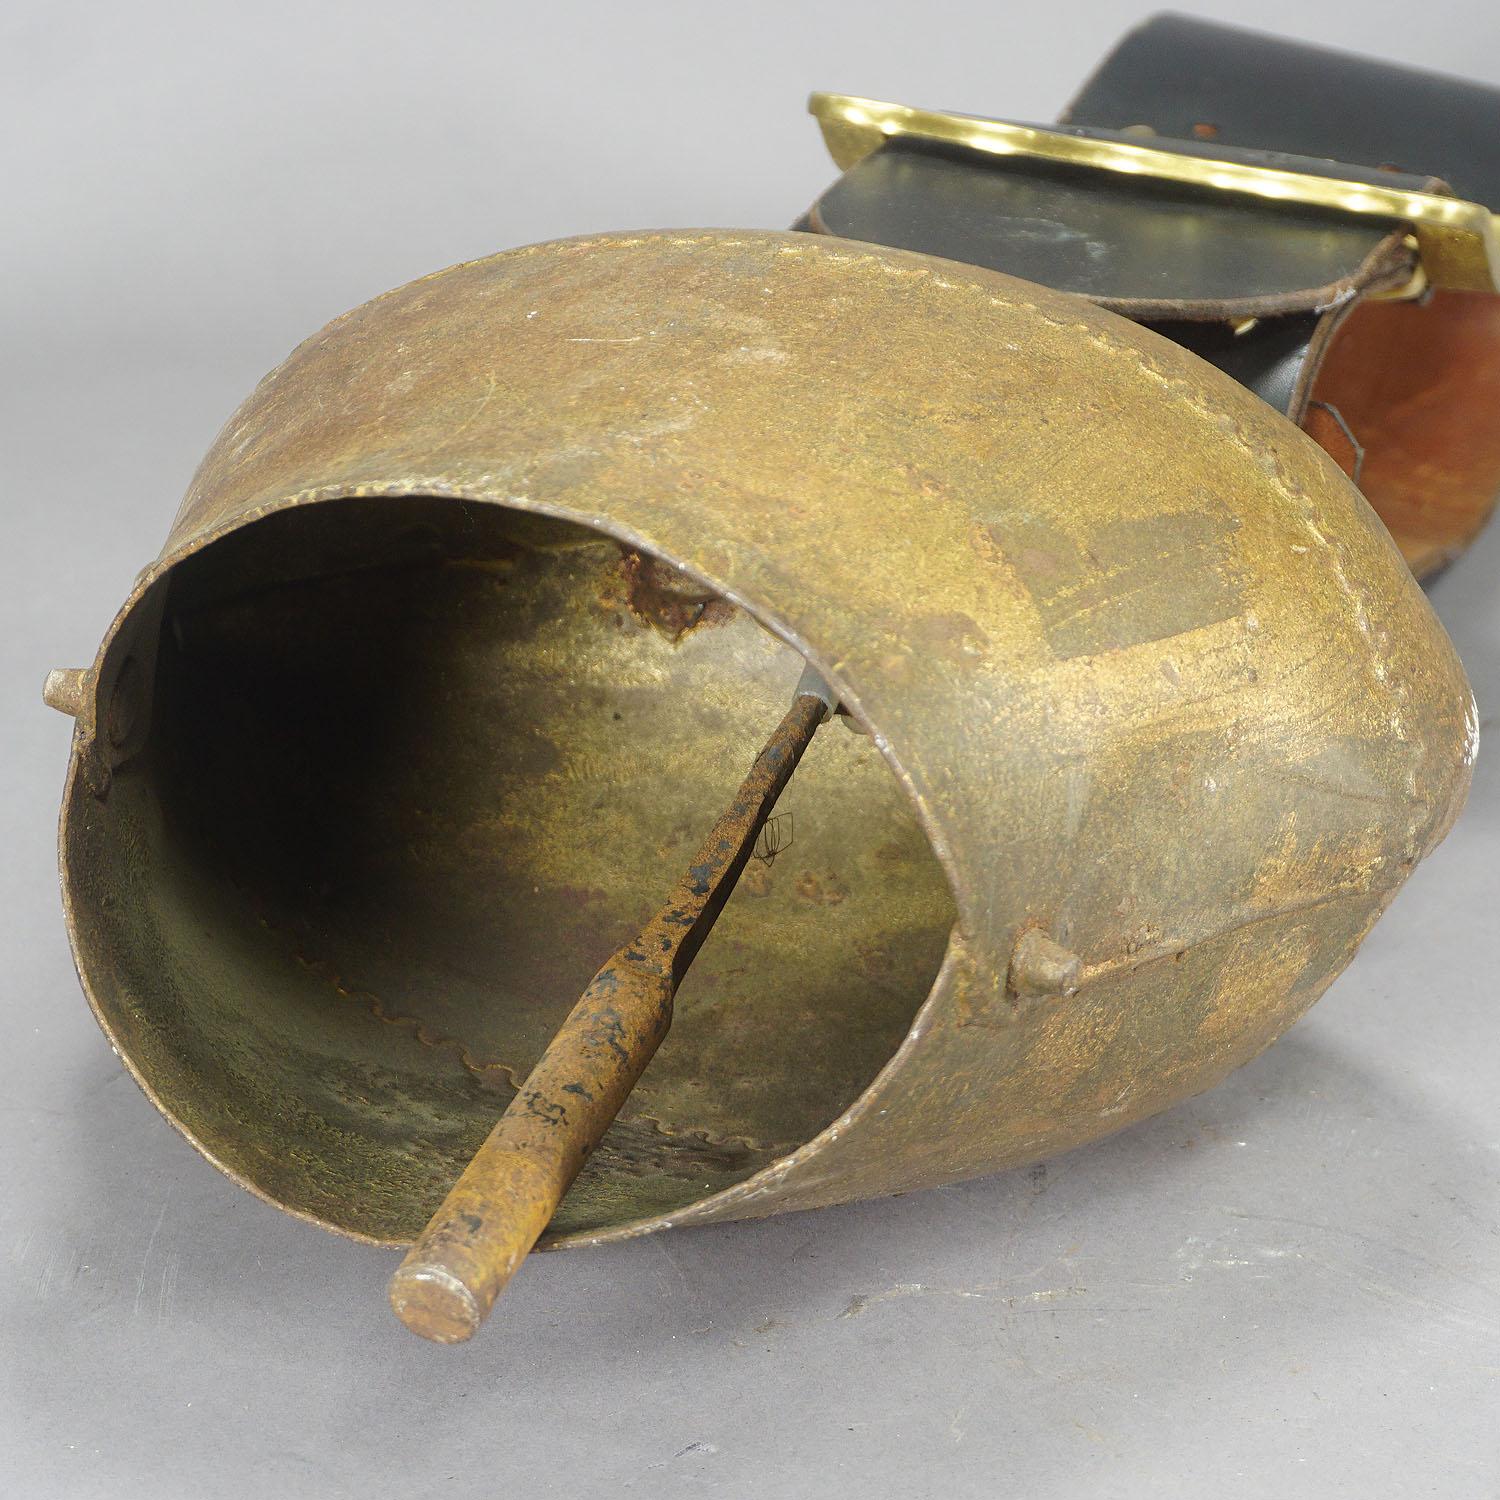 20th Century Vintage Swiss Handforged Cow Bell with Leather Strap, ca. 1920